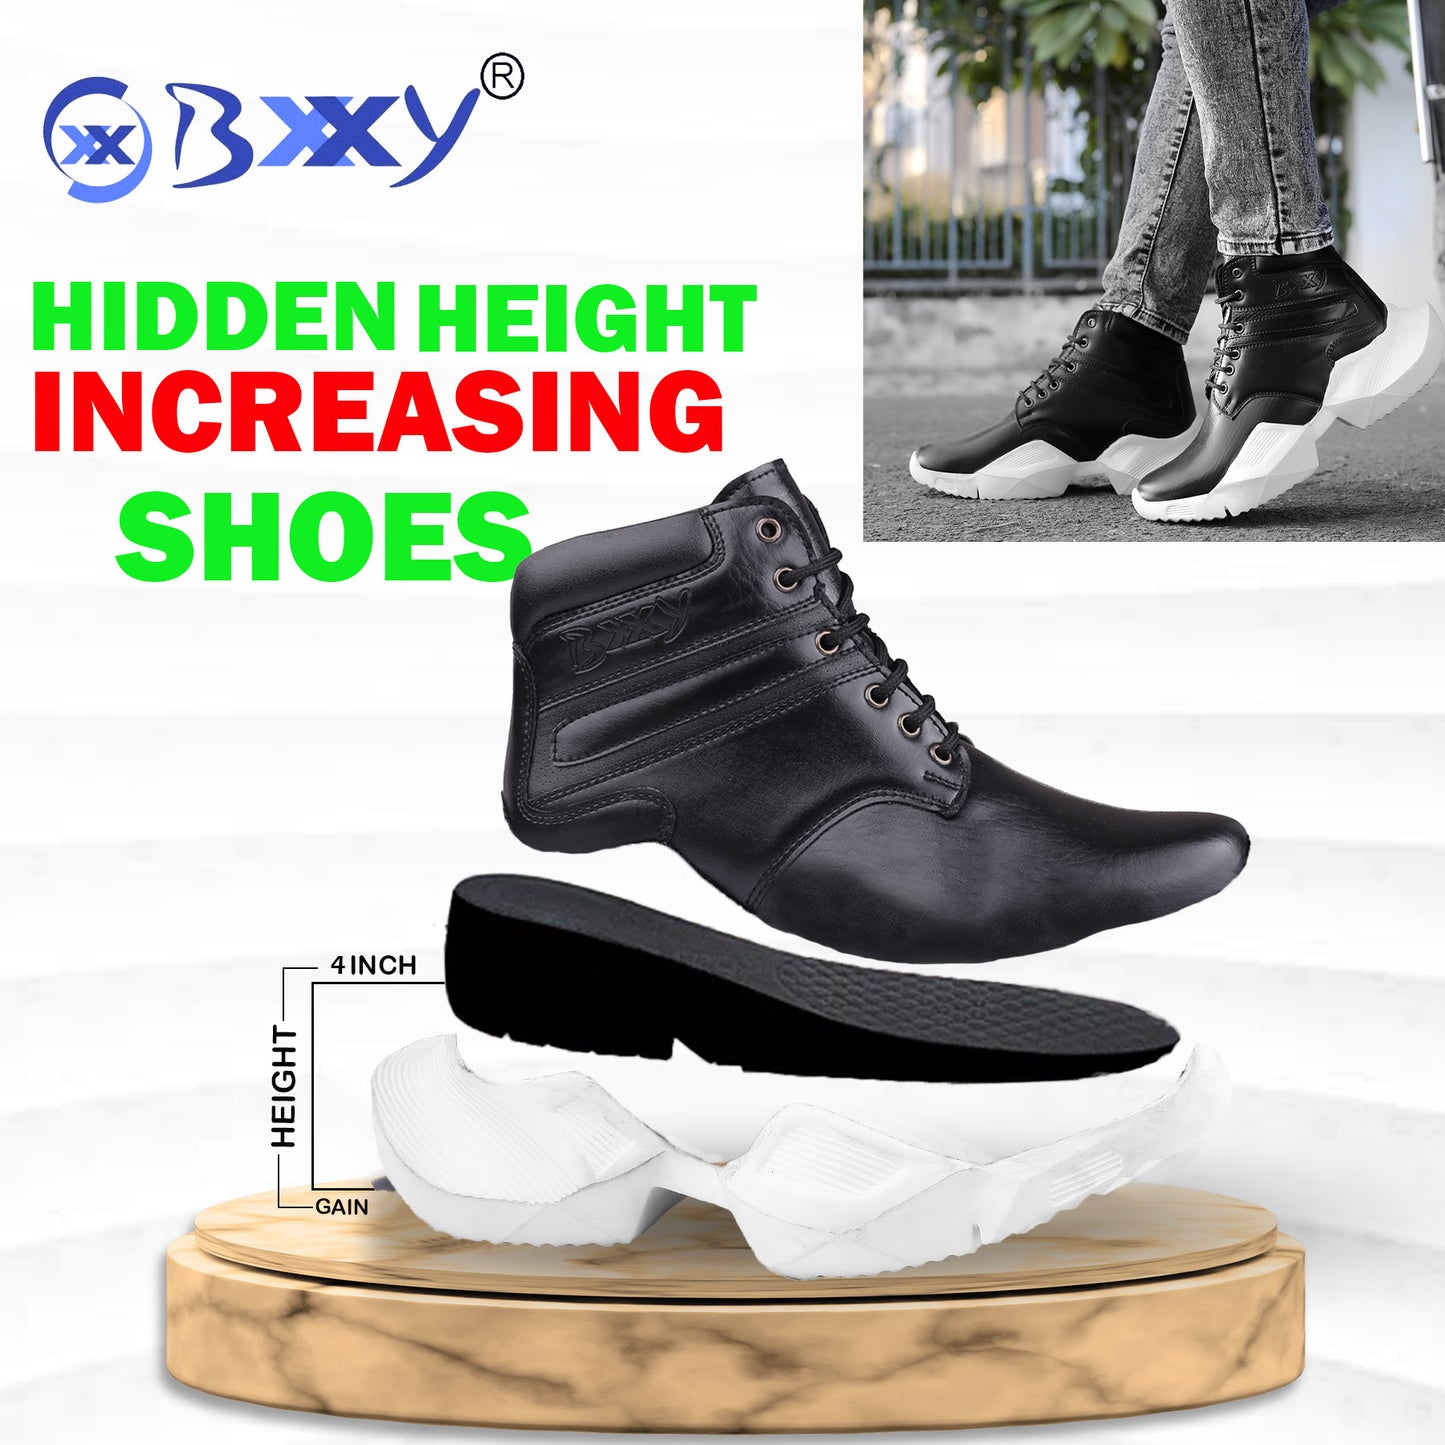 Bxxy Men's 4 Inch Hidden Height Increasing Faux Leather Casual Ankle Lace-Up Light Weight Shoes